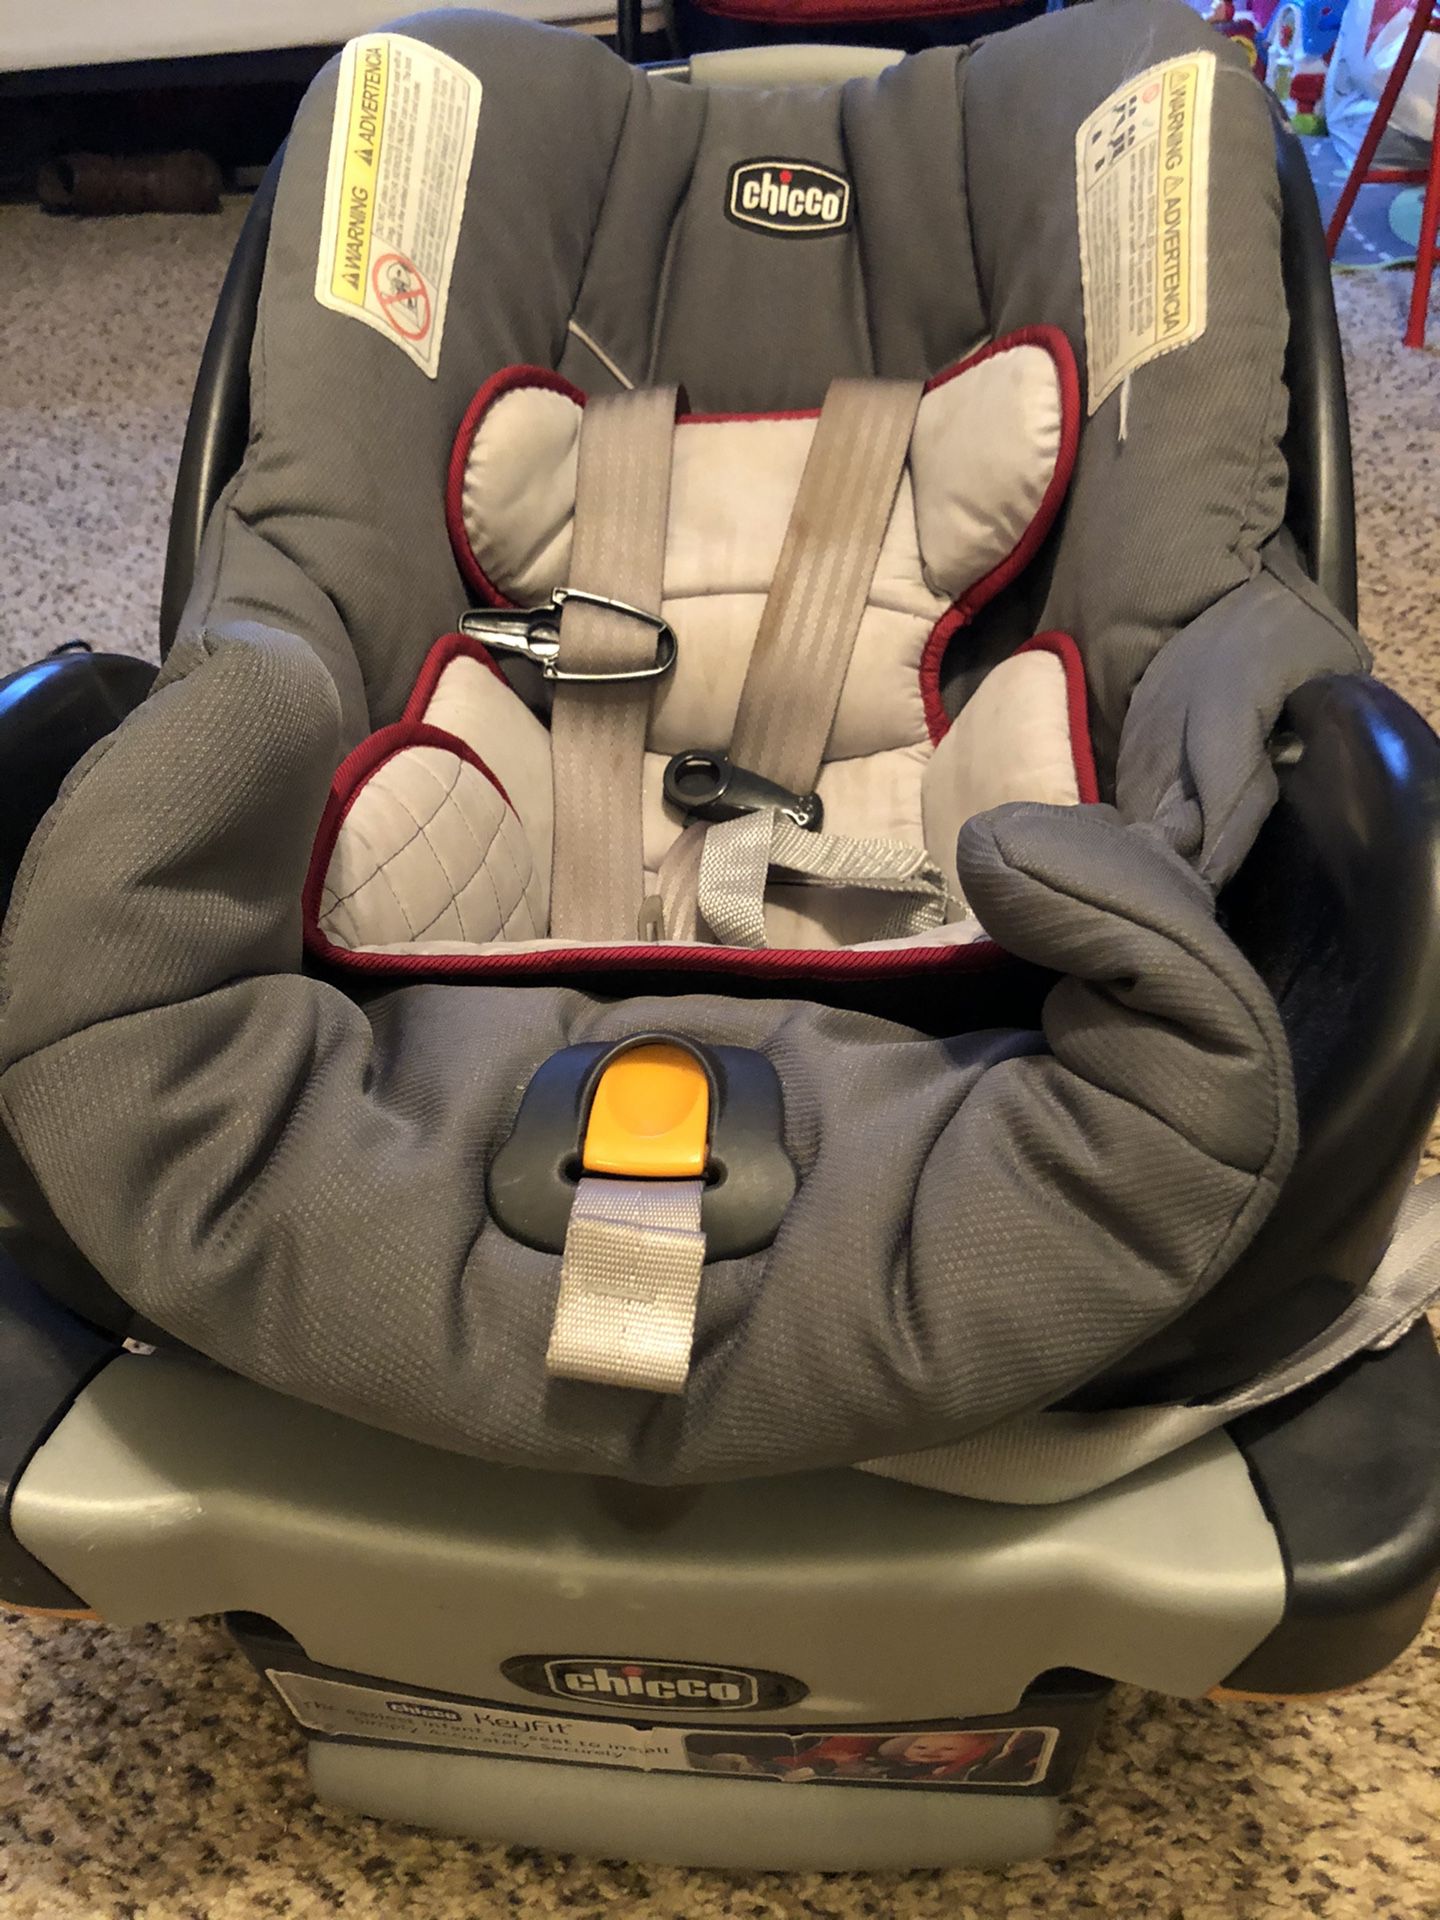 Chicco Infant car seat with base and stroller